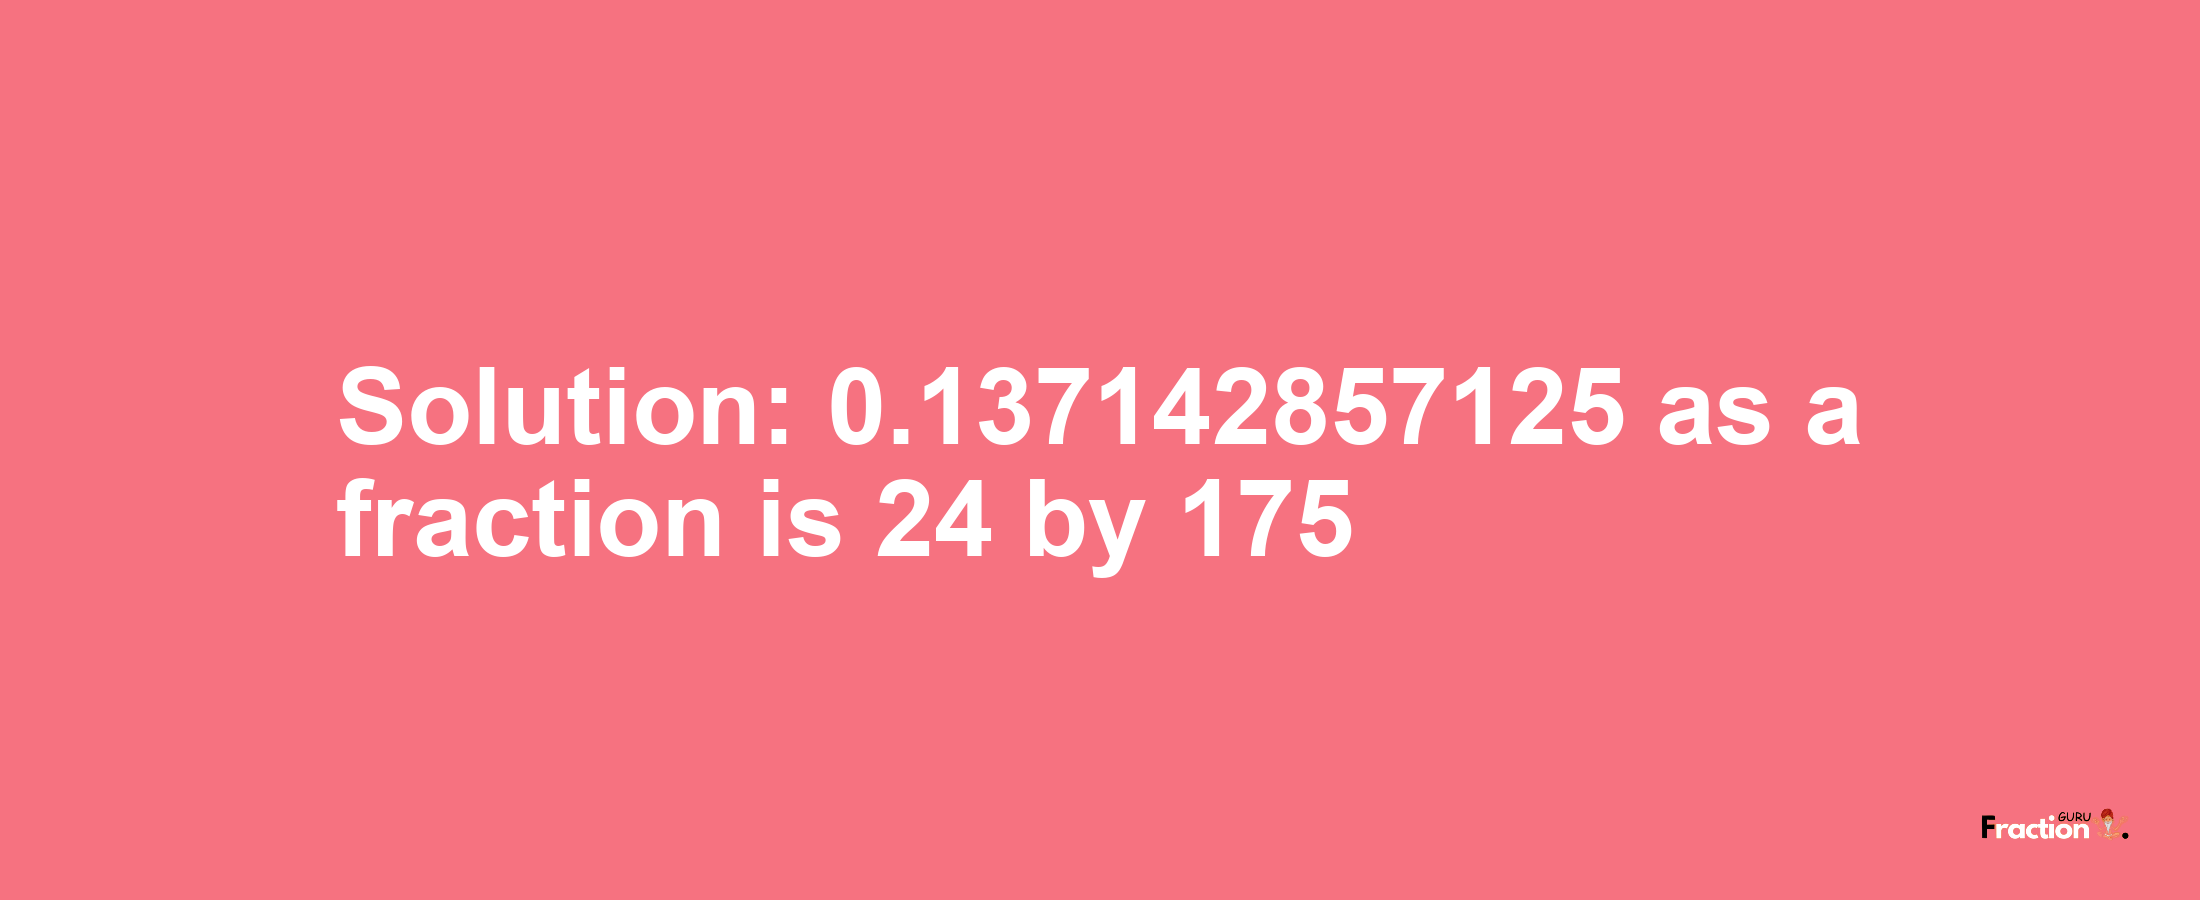 Solution:0.137142857125 as a fraction is 24/175